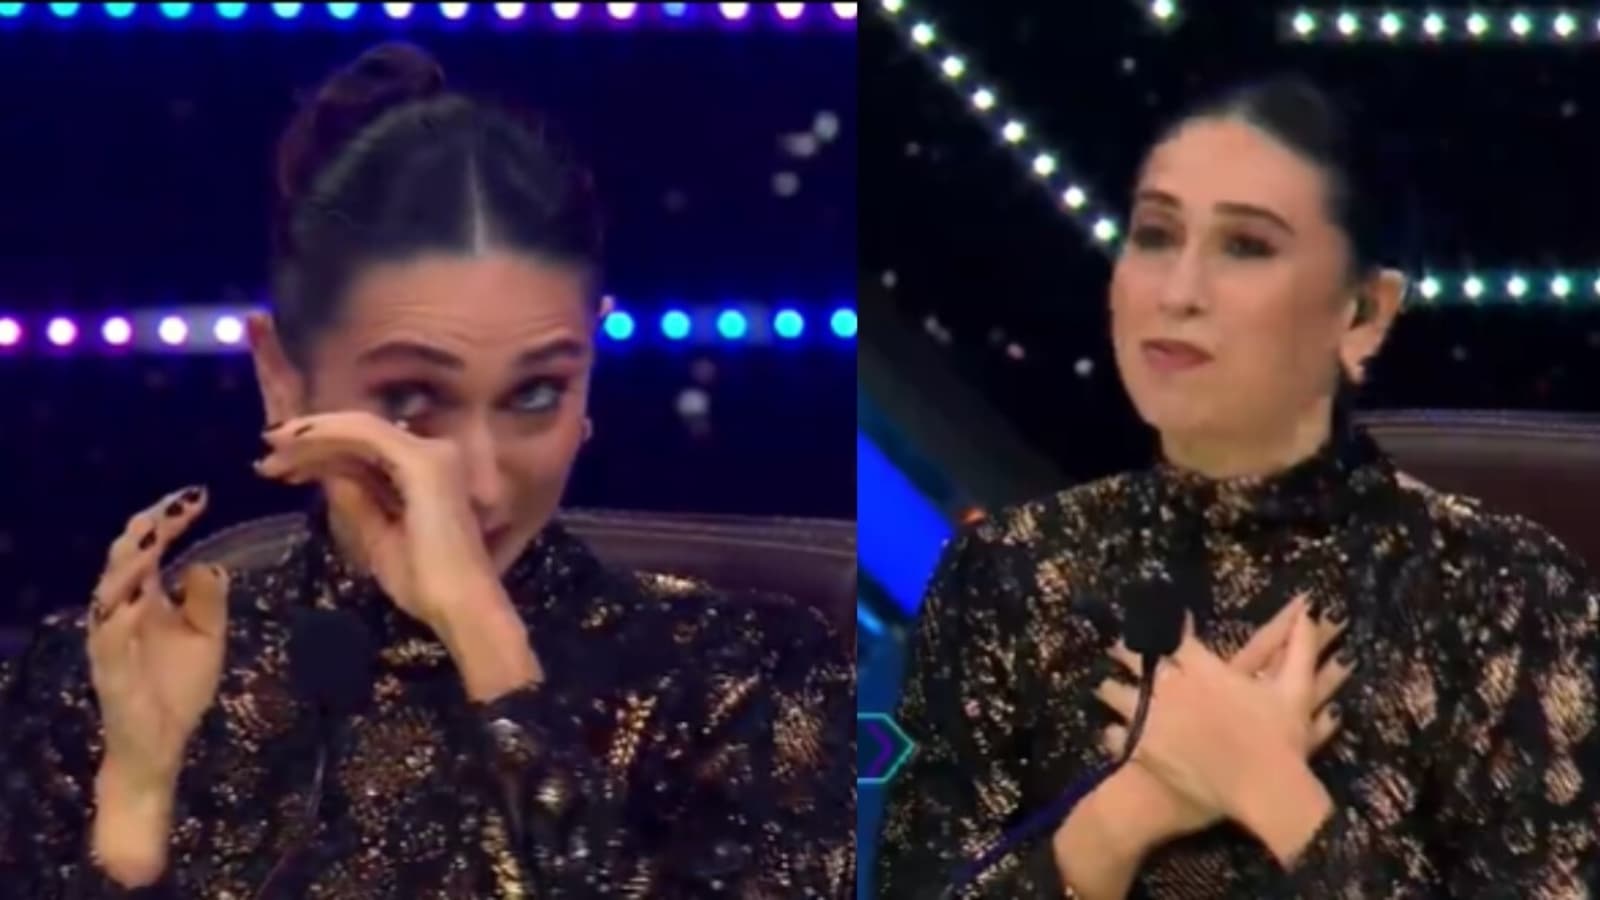 Xxx Video Karishma Kapoor - Karisma Kapoor, filling in for Shilpa Shetty, cries on Super Dancer 4 sets.  Here's why - Hindustan Times